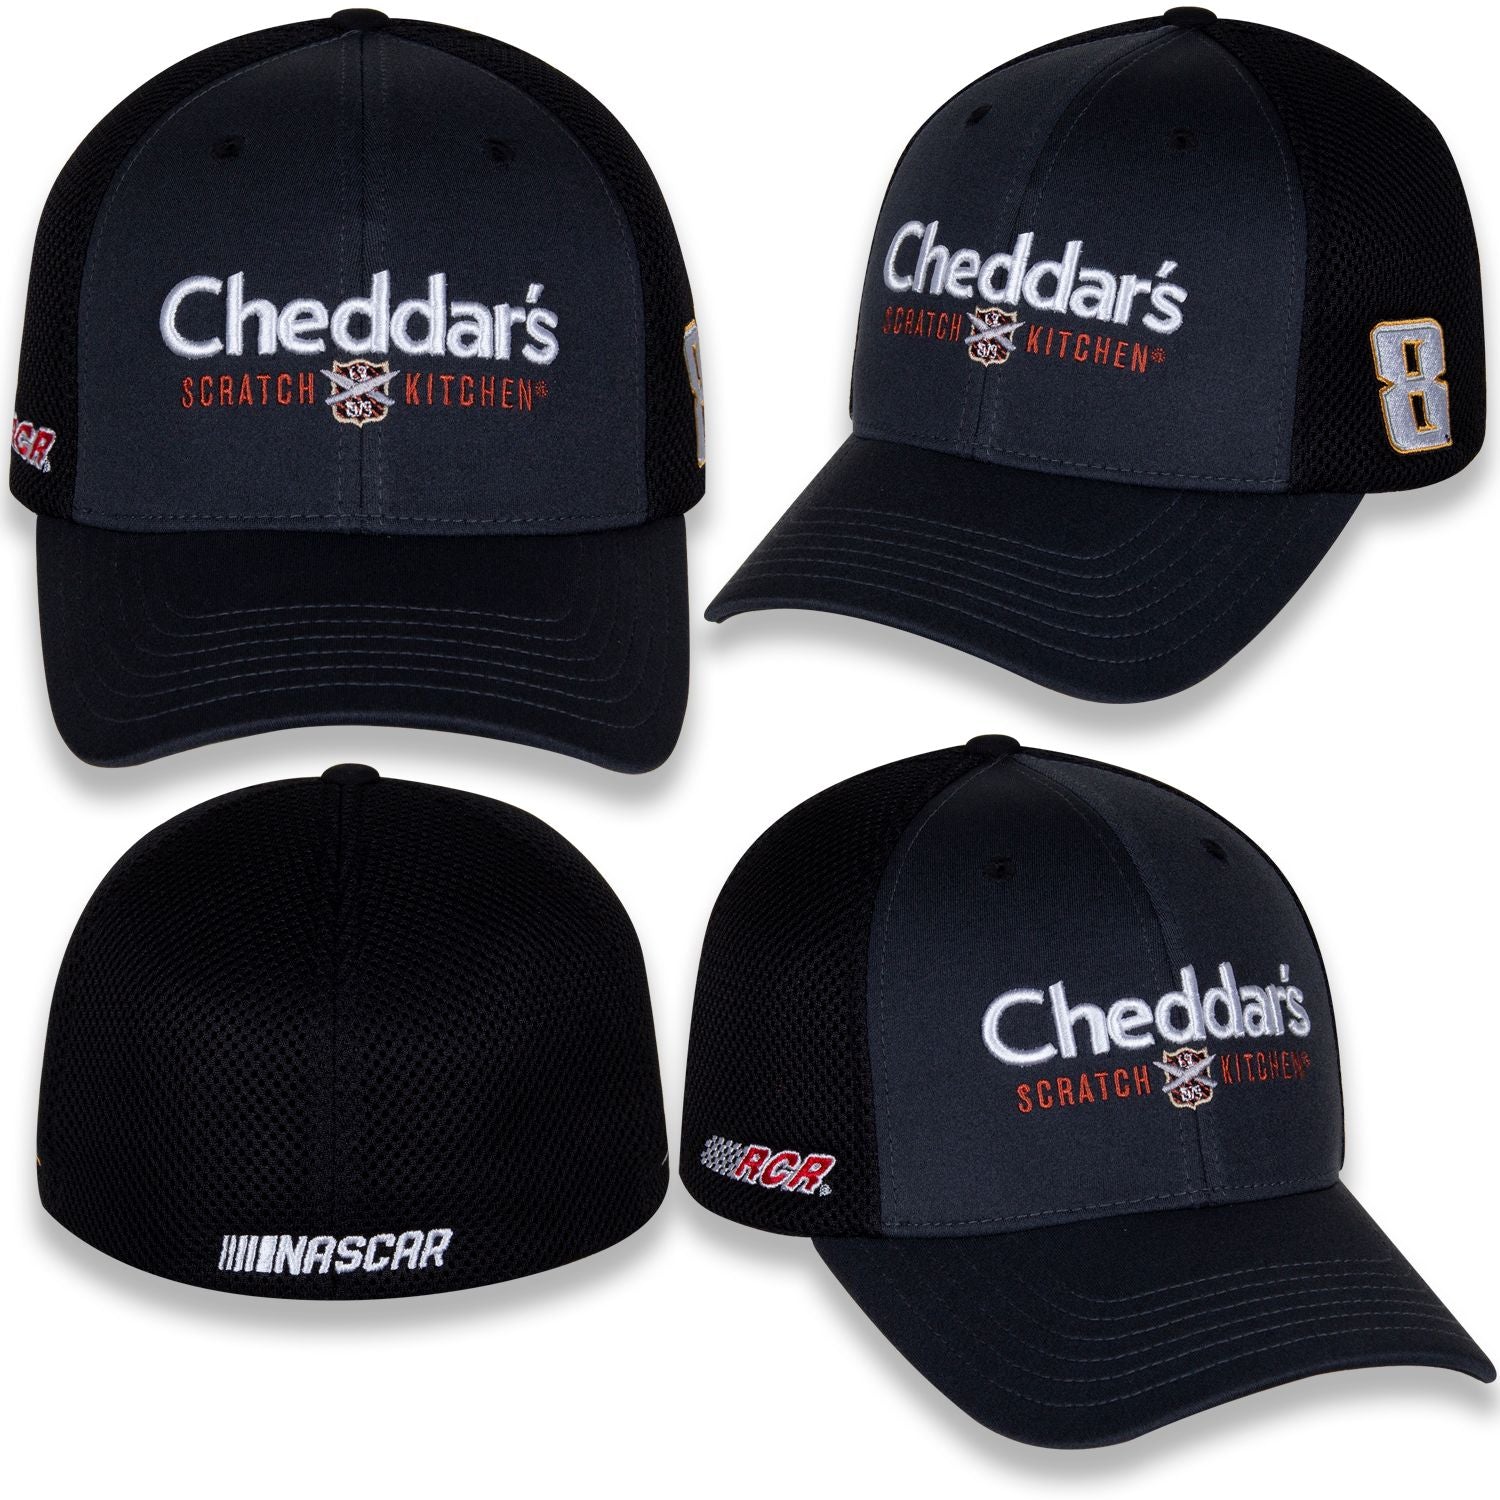 Kyle Busch #8 Cheddar's Qualifying Fitted Hat